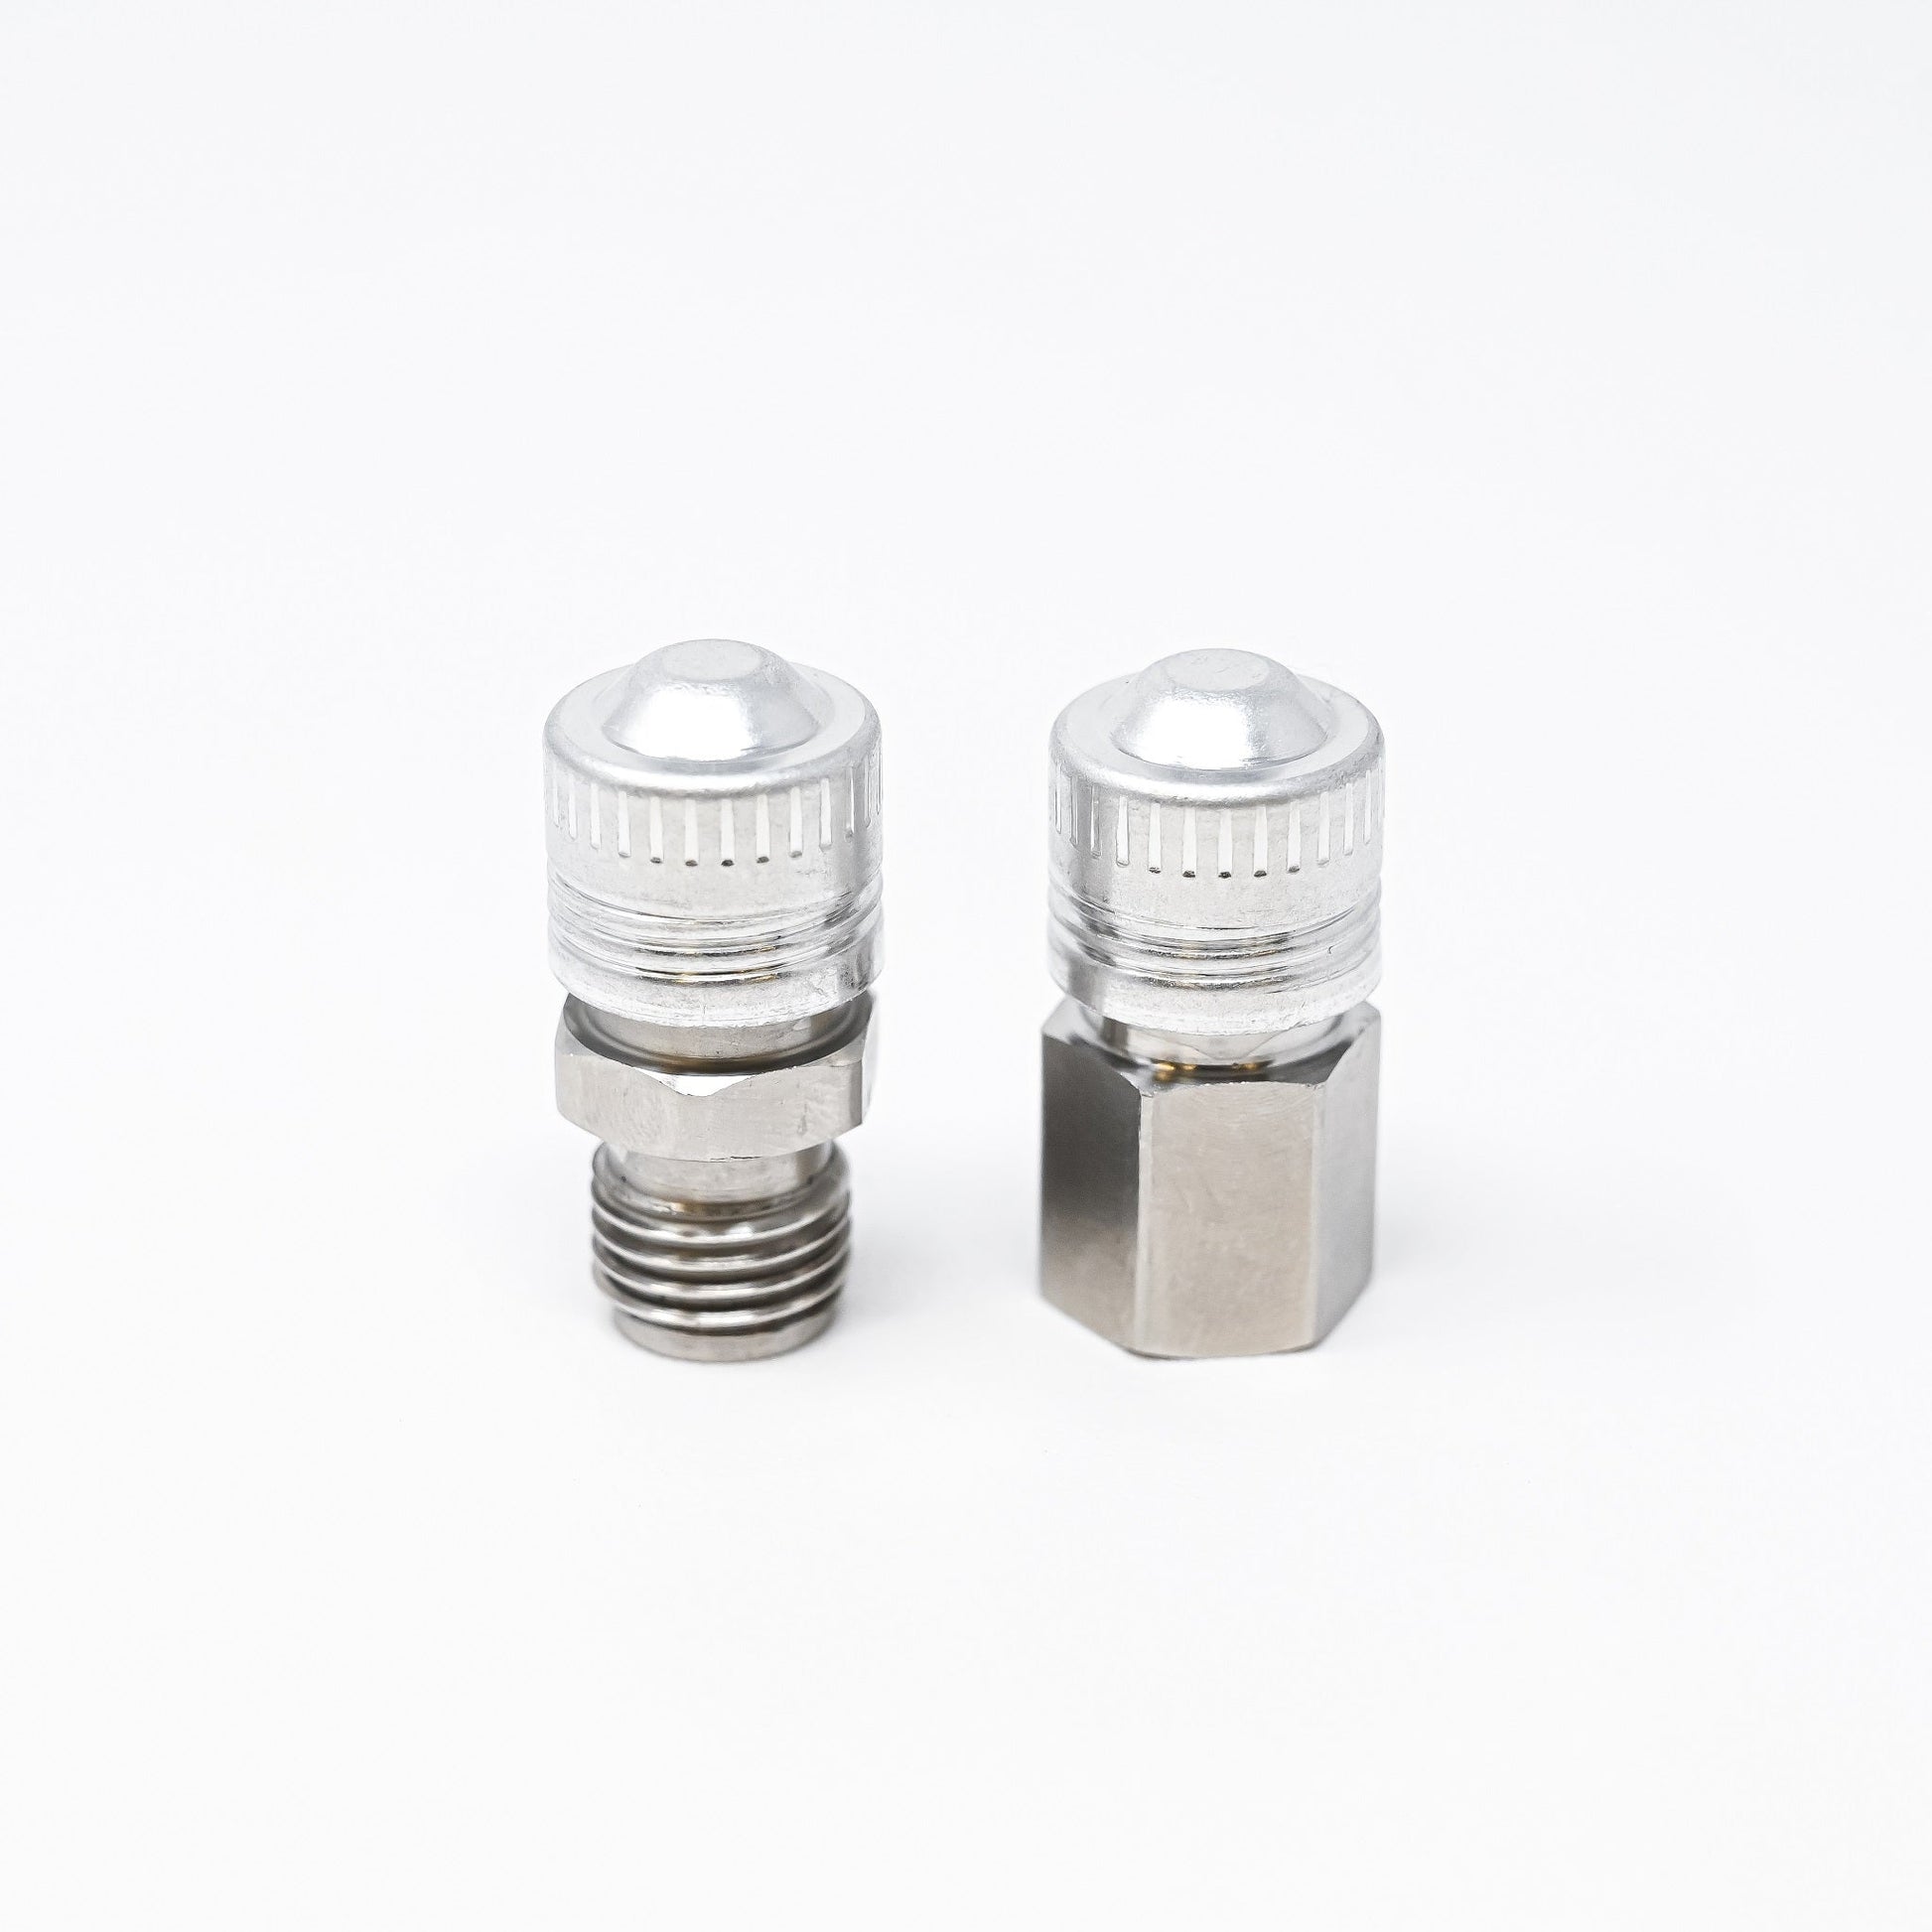 Two piece stainless steel check valve.